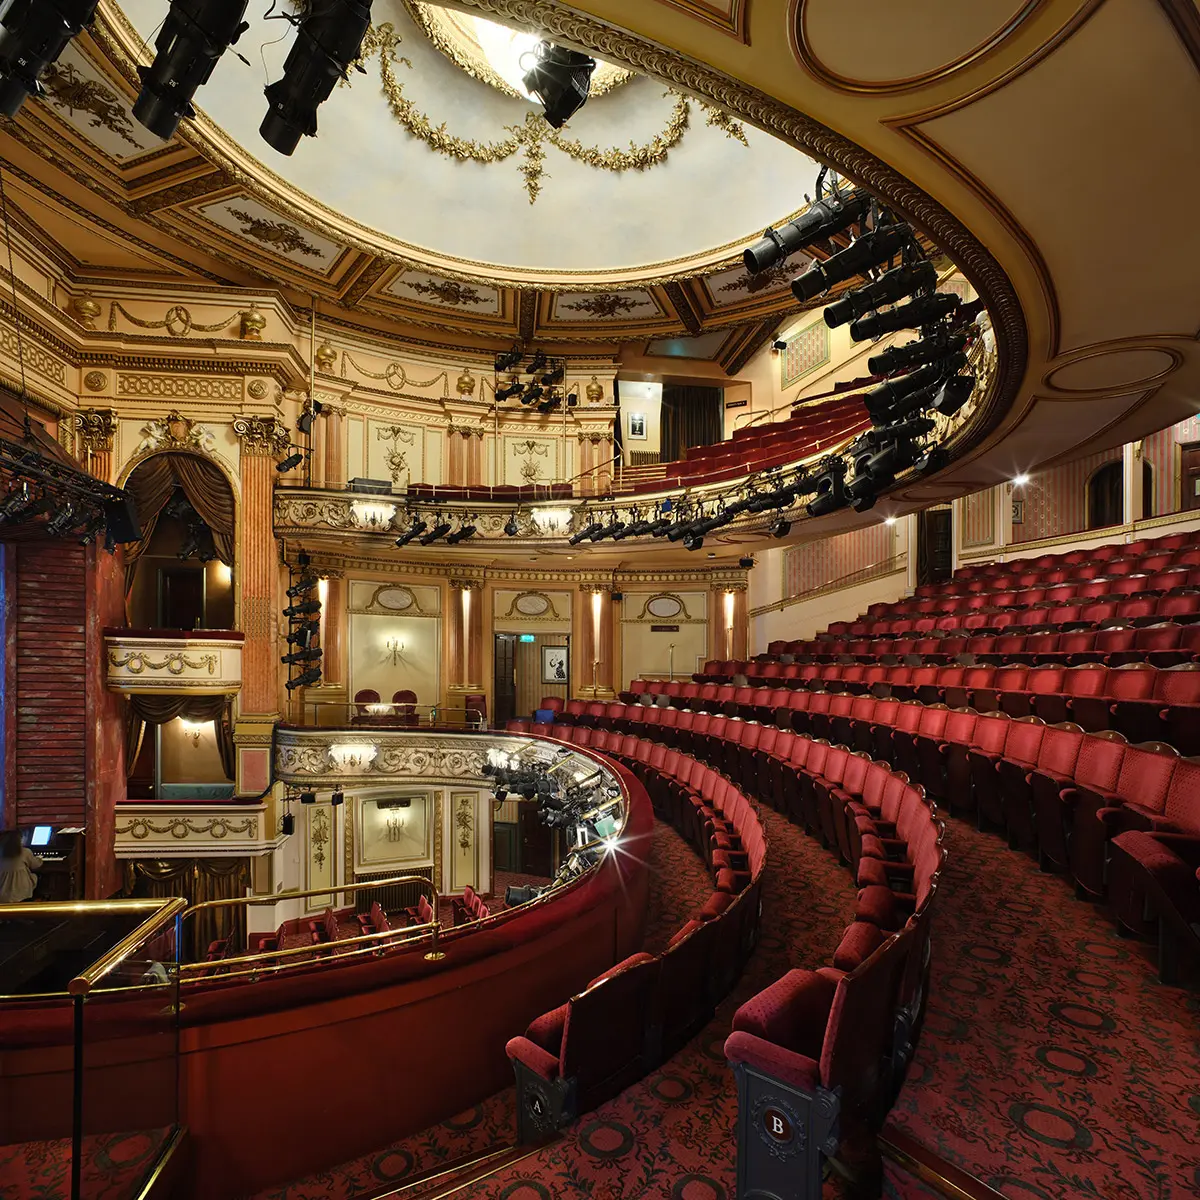 Gielgud Theatre interior view of the seats